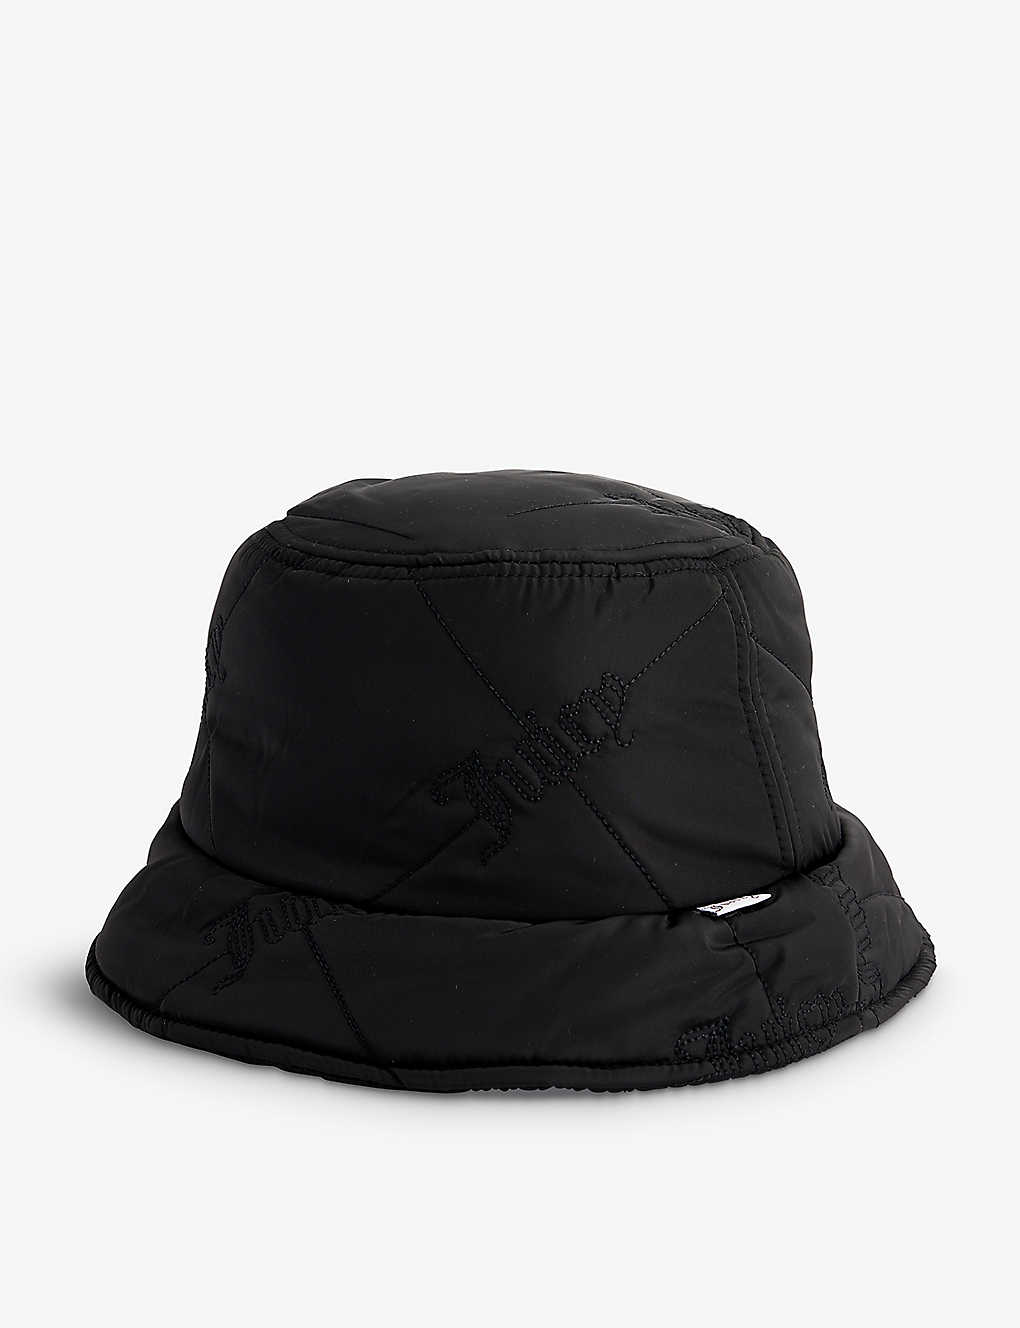 Juicy Couture Womens Black101 Quilted Recycled Nylon Bucket Hat